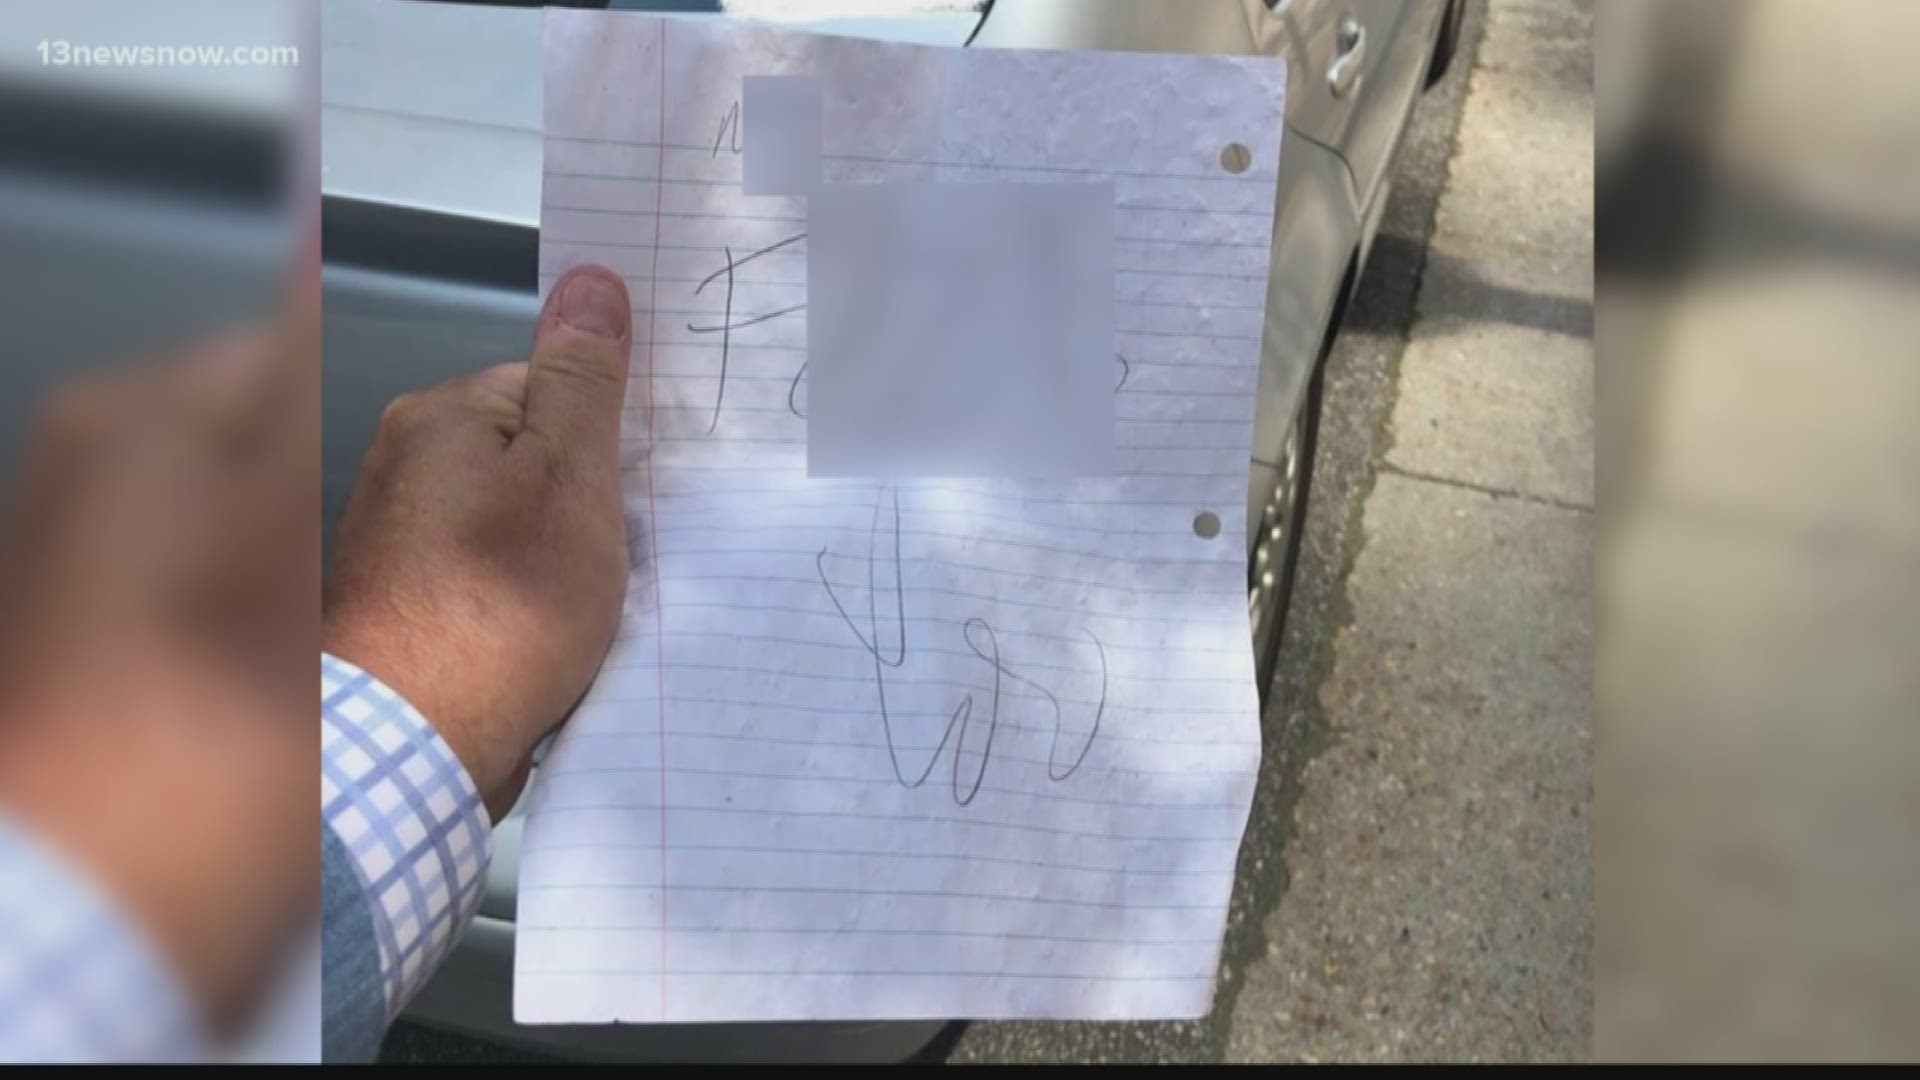 Virginia Beach district city council candidate, David Nygaard, said a racist note was left on his car in Town Center. 13News Now Chenue Her spoke to Nygaard.